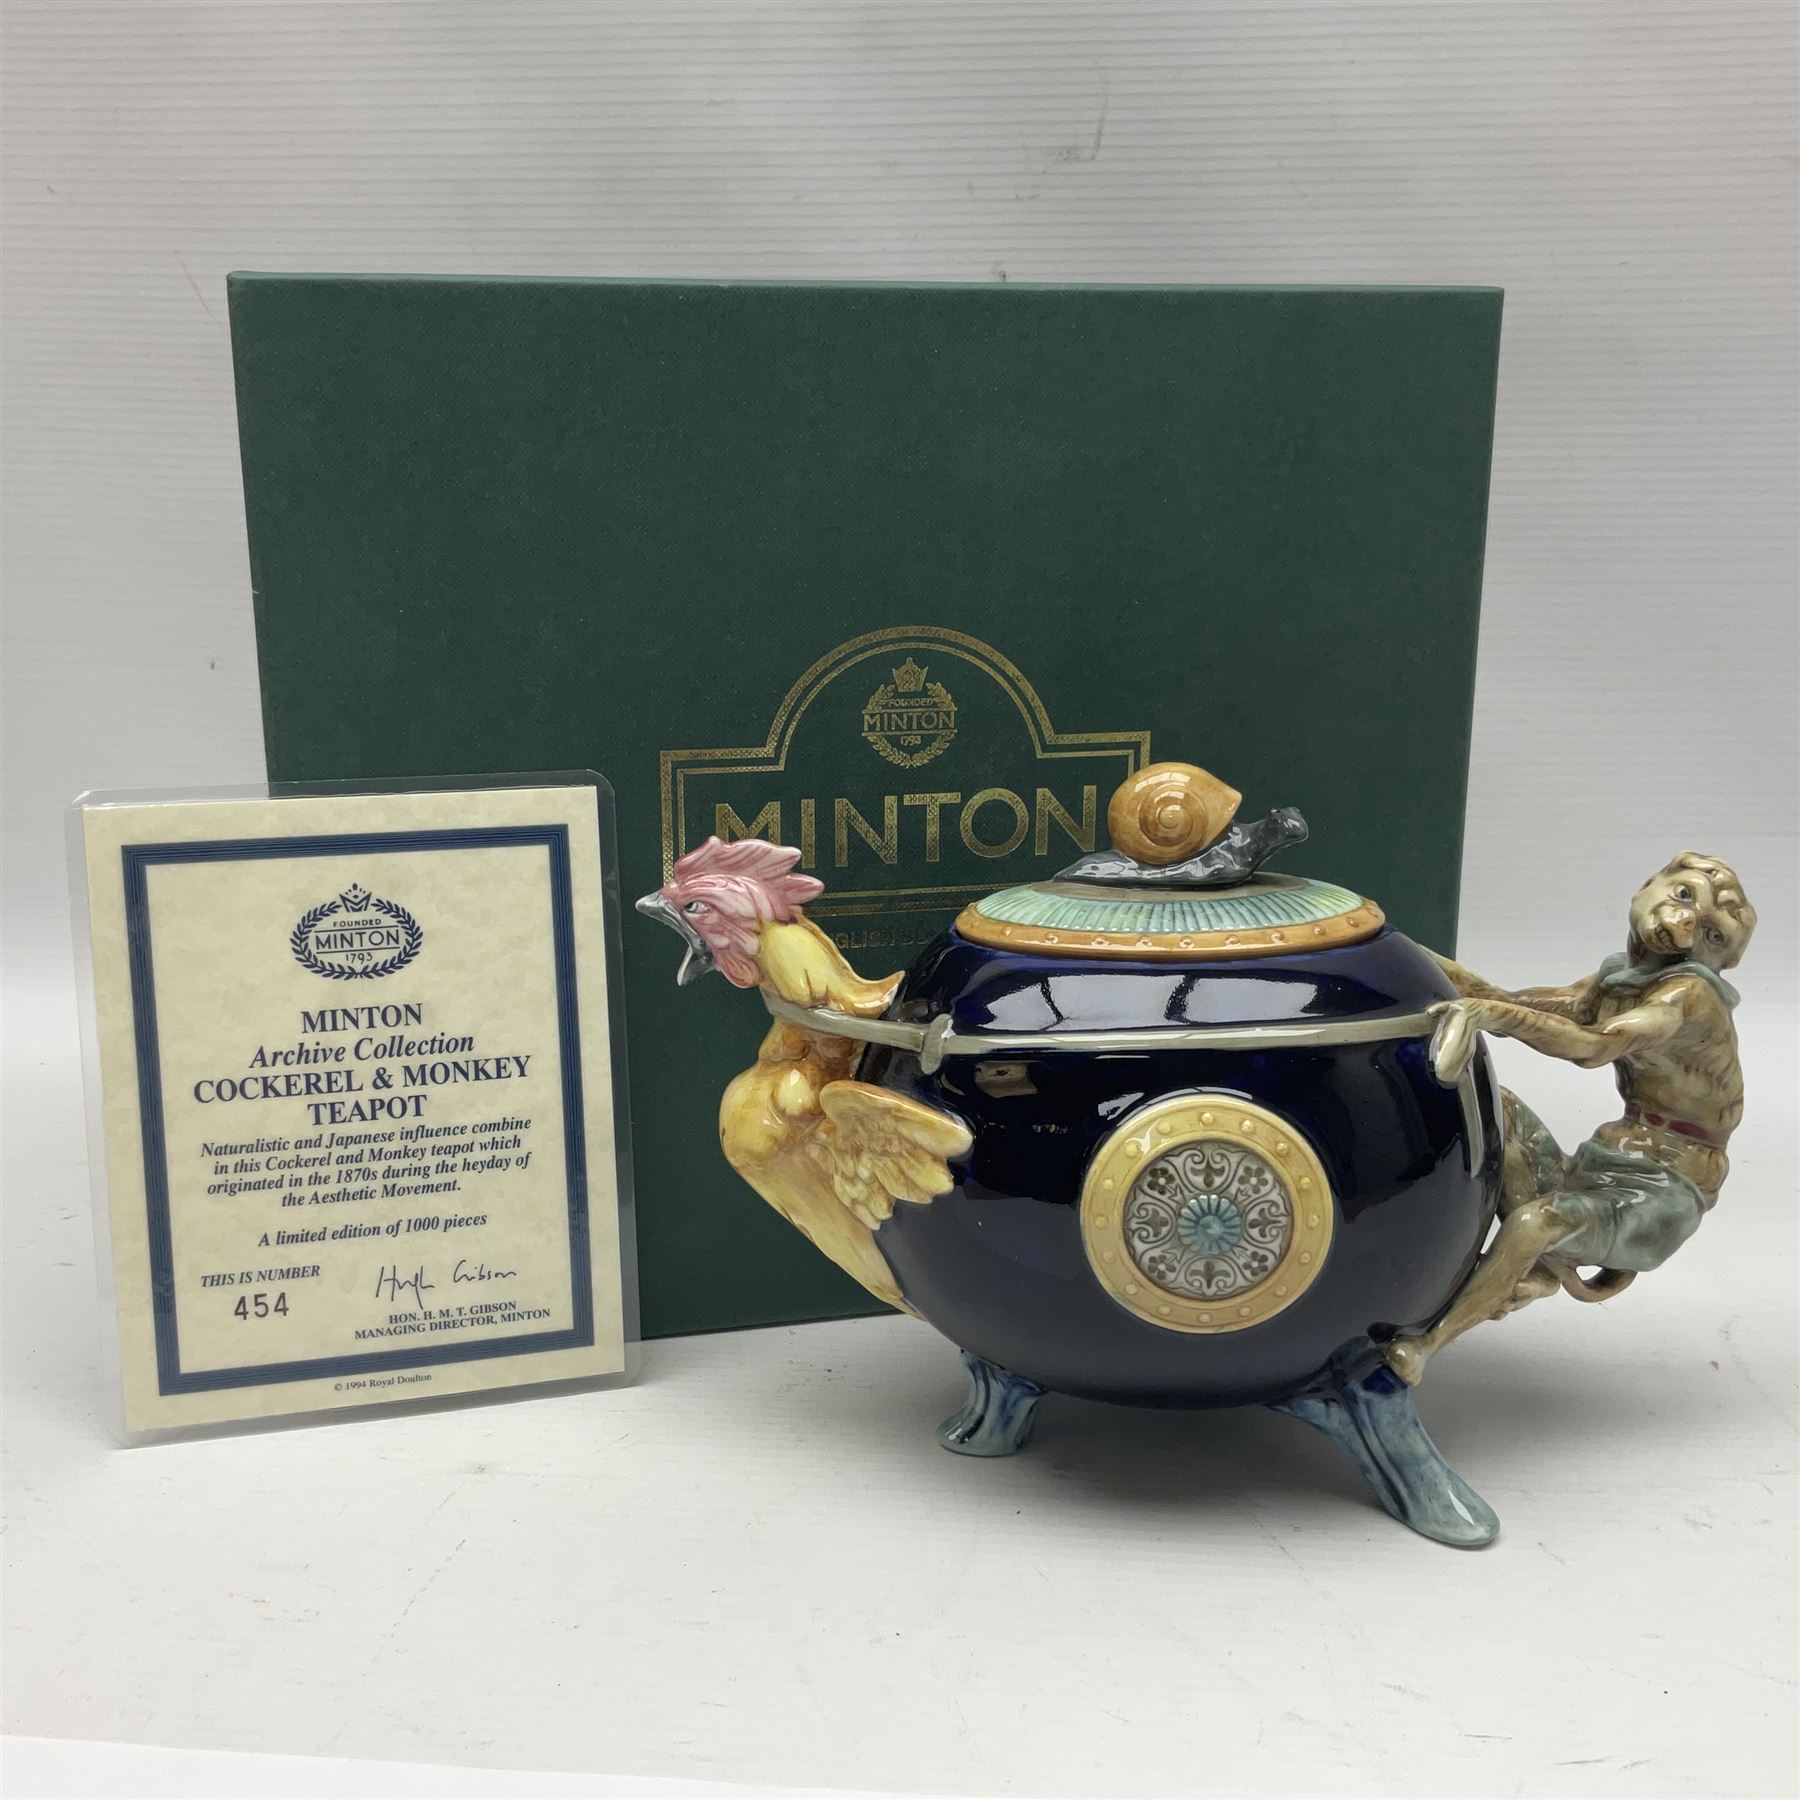 Minton Archive collection cockerel and monkey teapot - Image 2 of 13